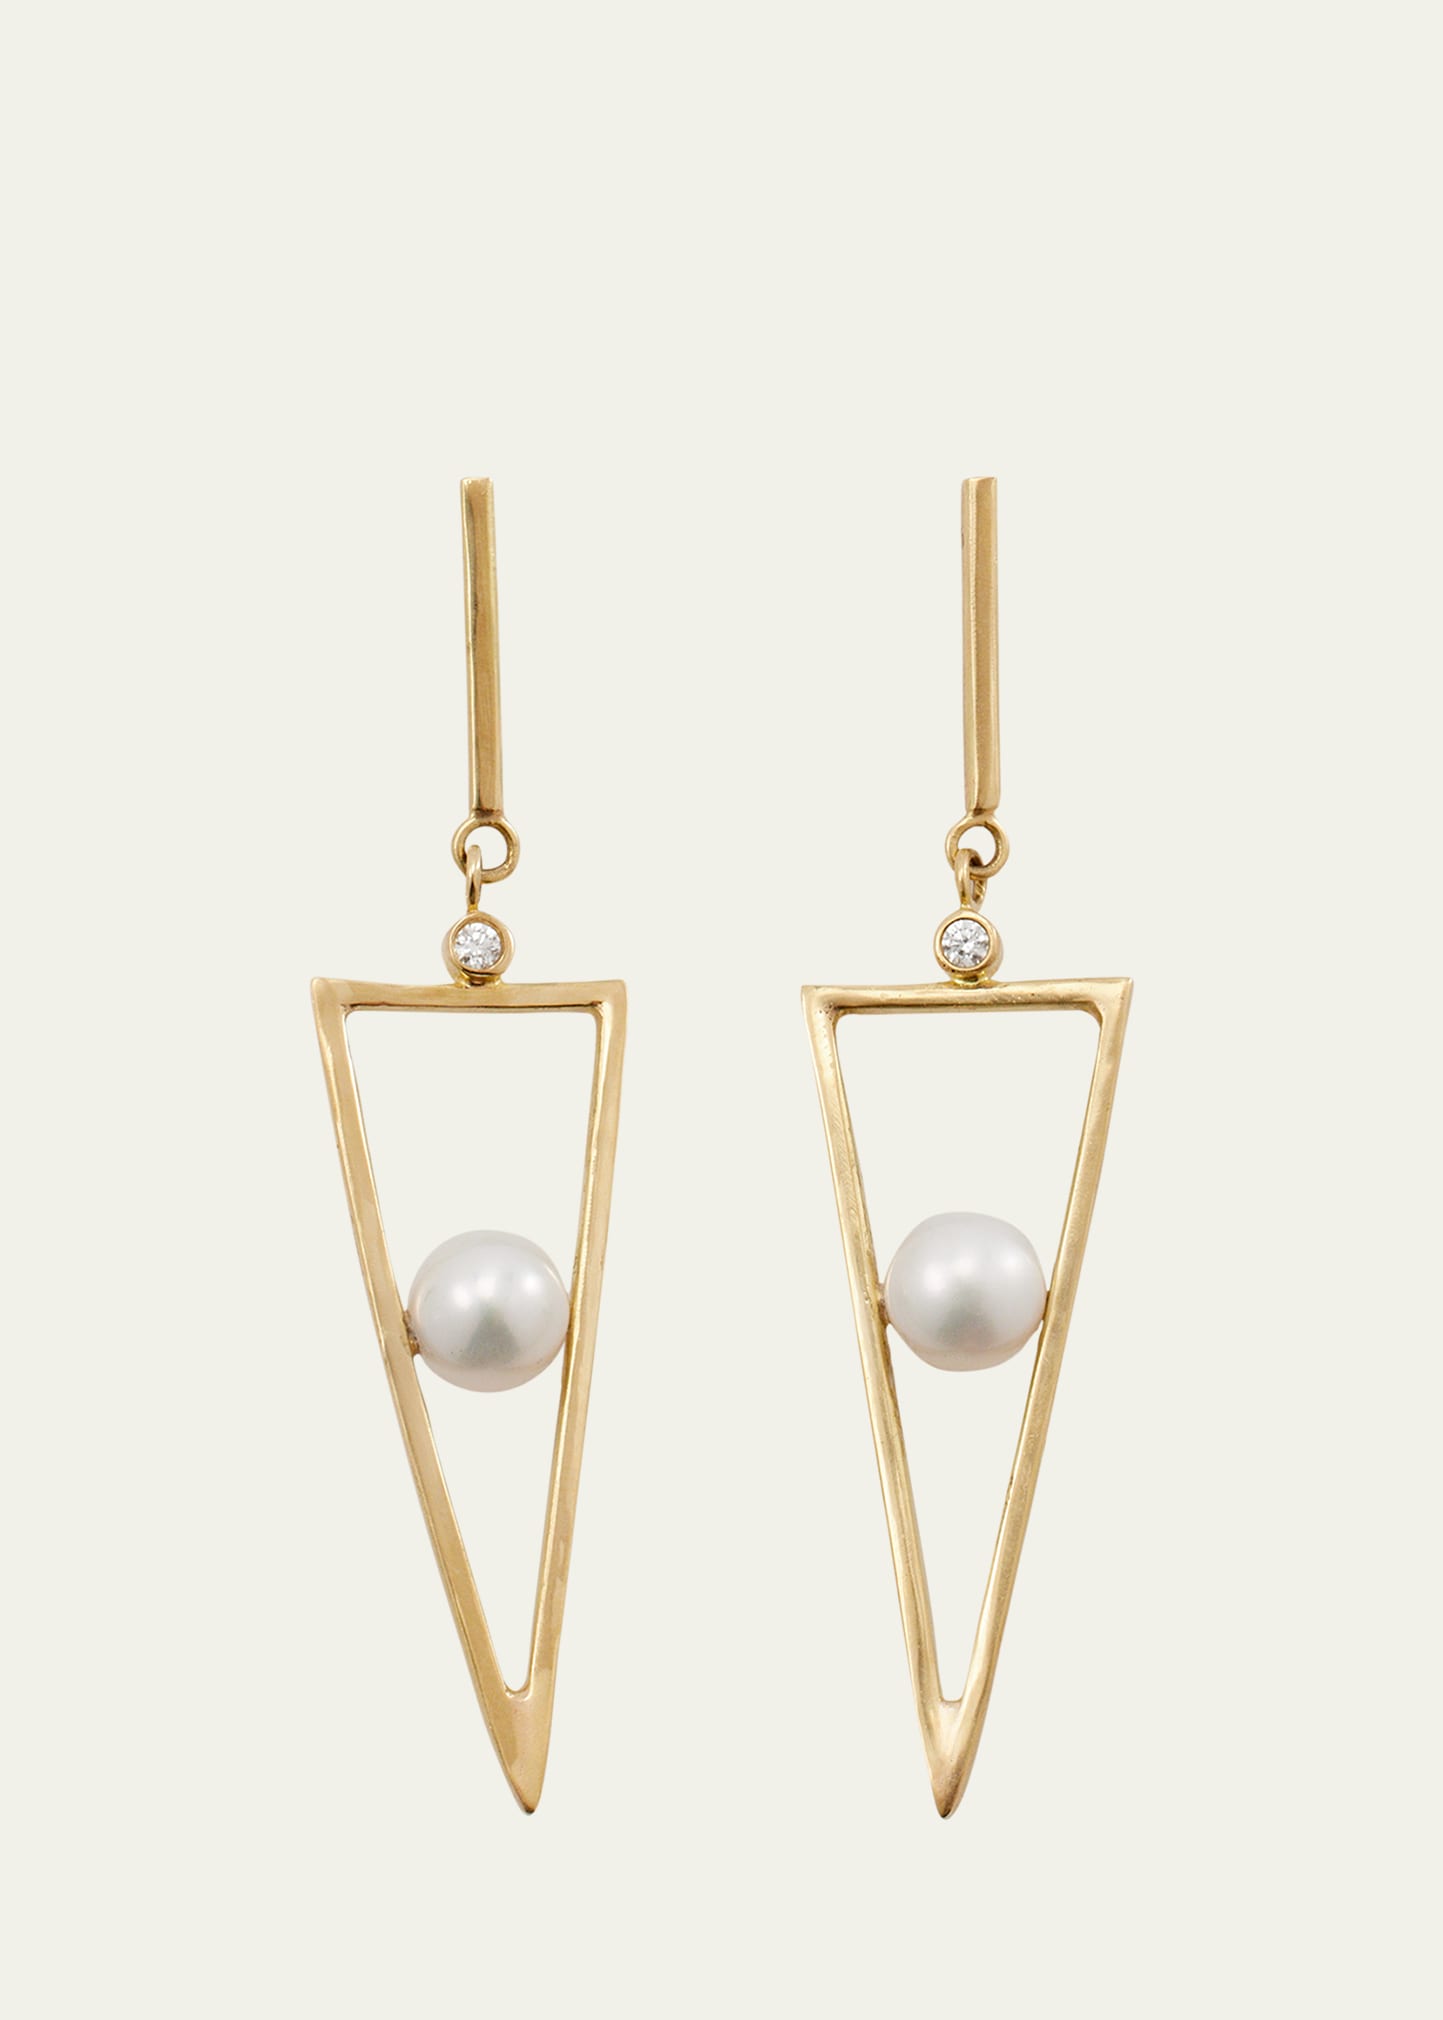 18K Yellow Gold Triangle Drop Hoop Earrings with White Diamonds and Freshwater Pearls